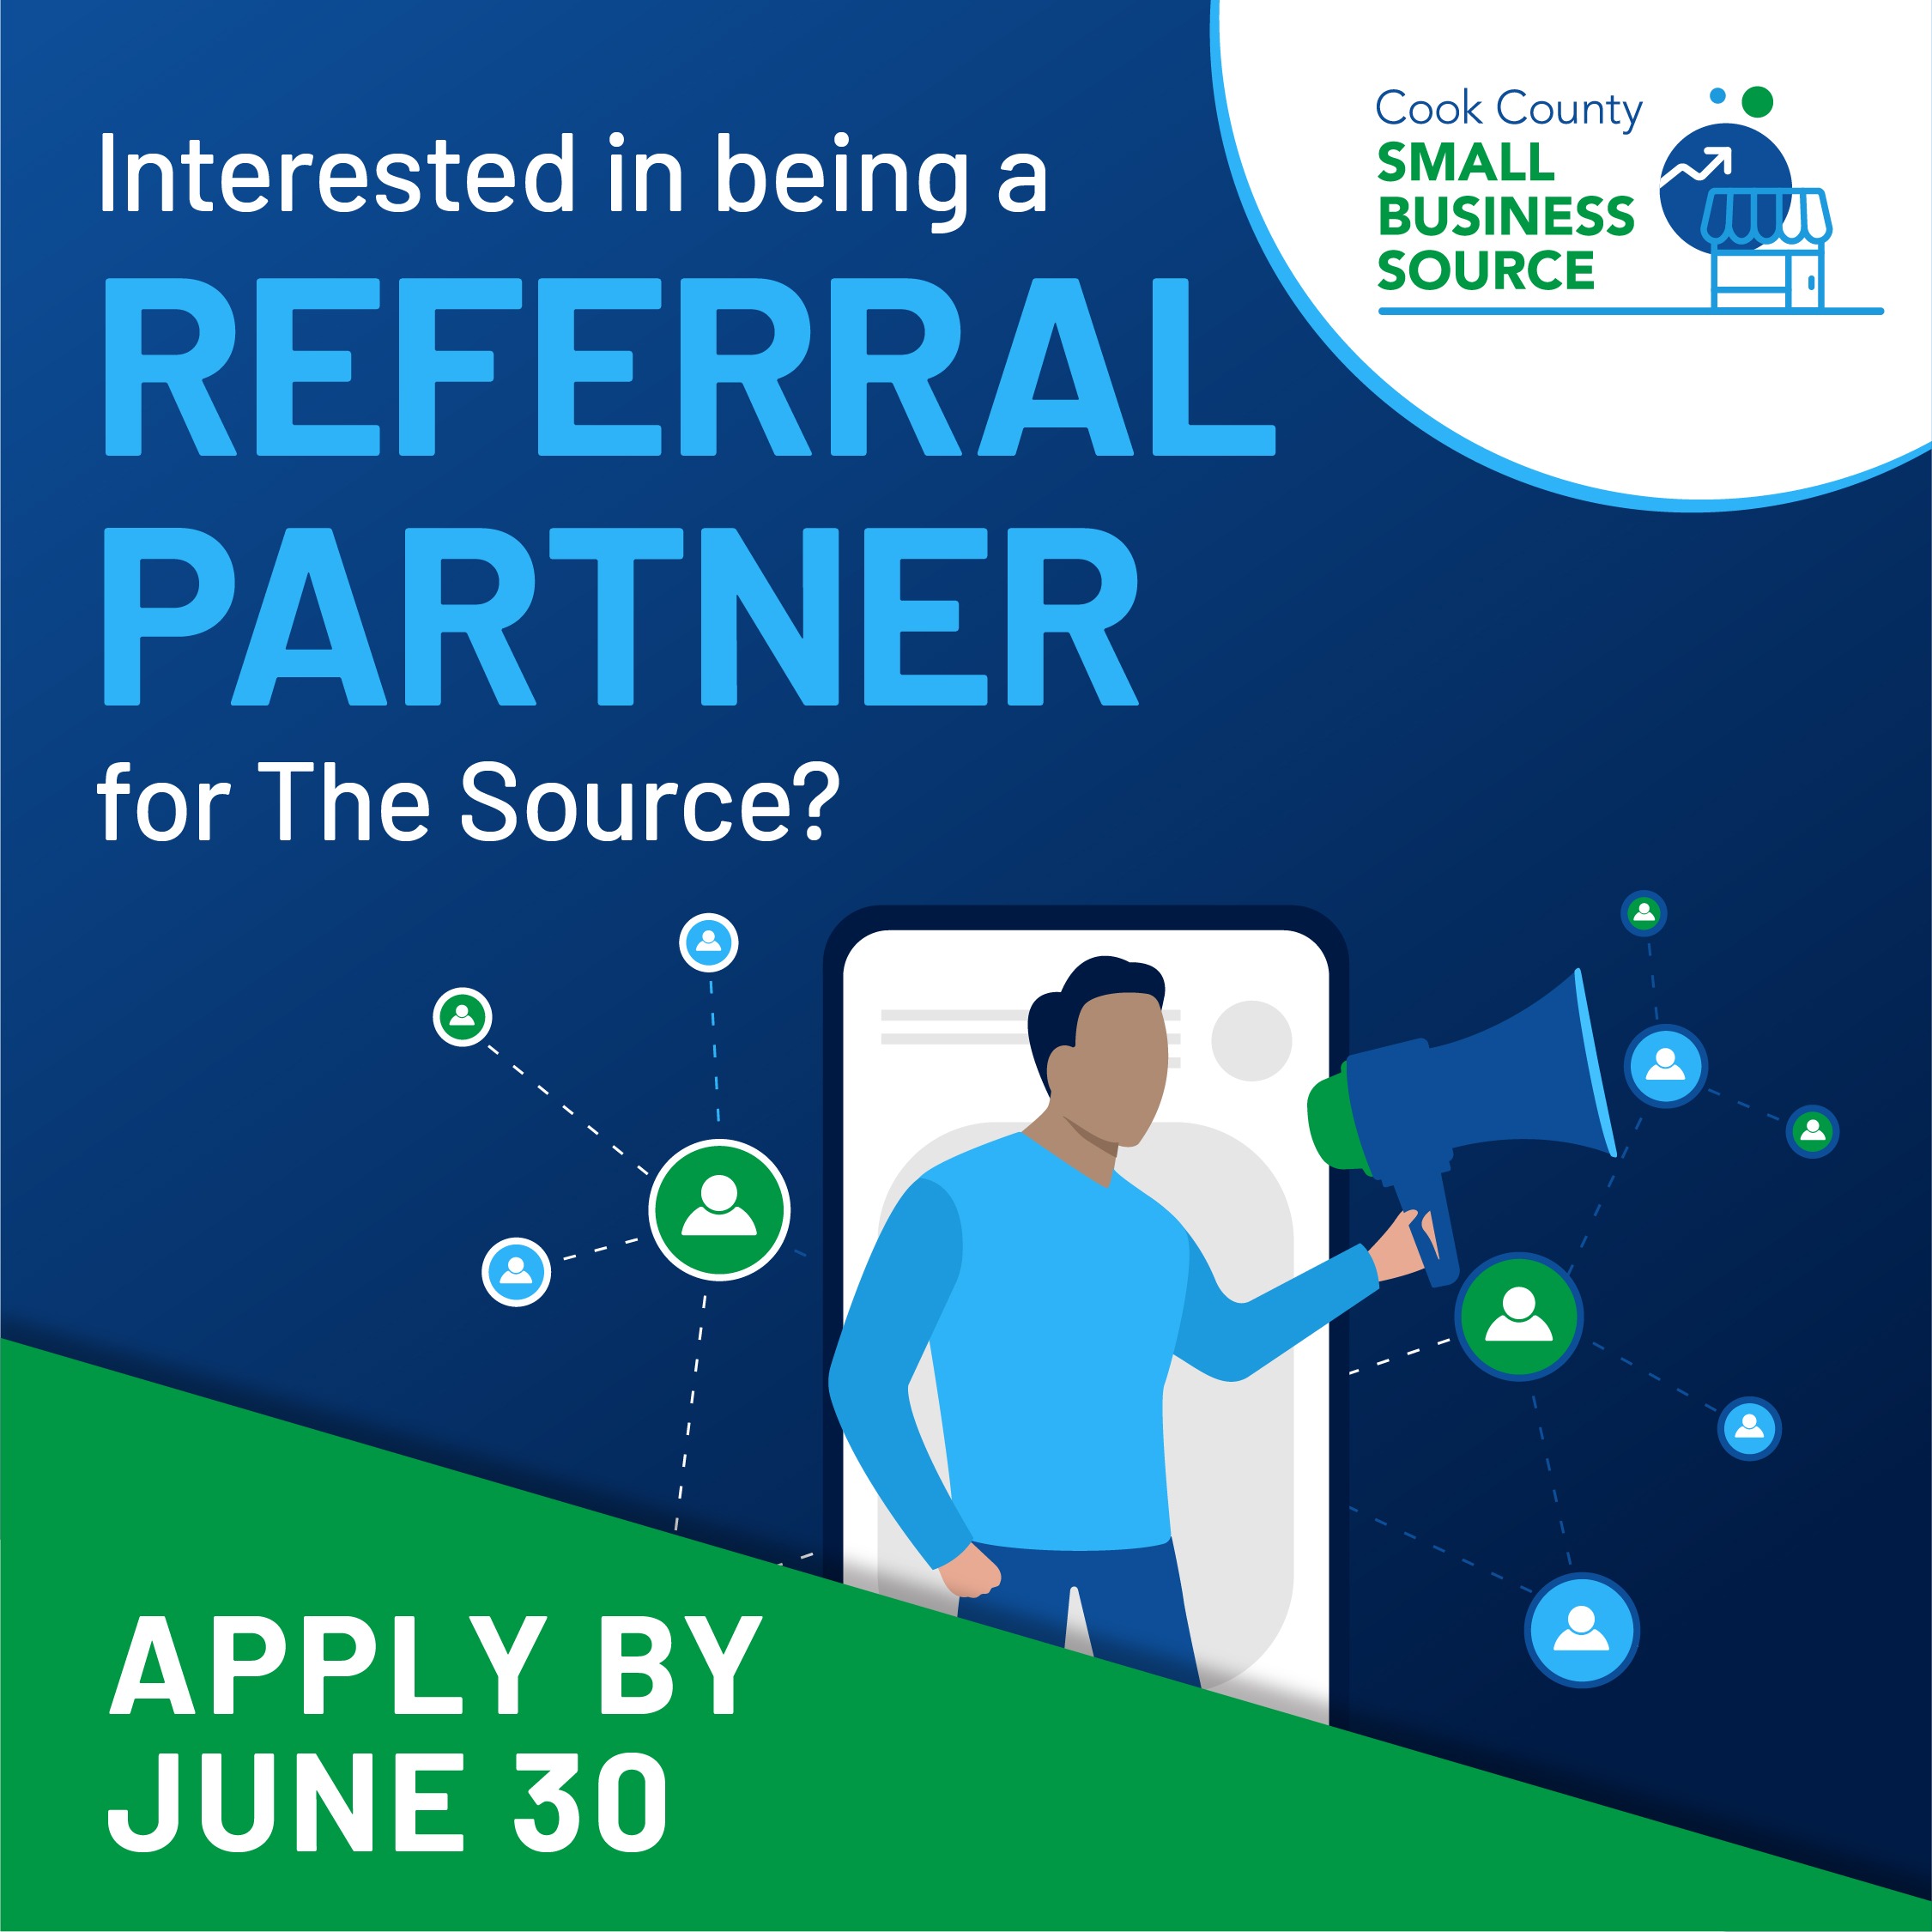 Become a Referral Partner for The Source